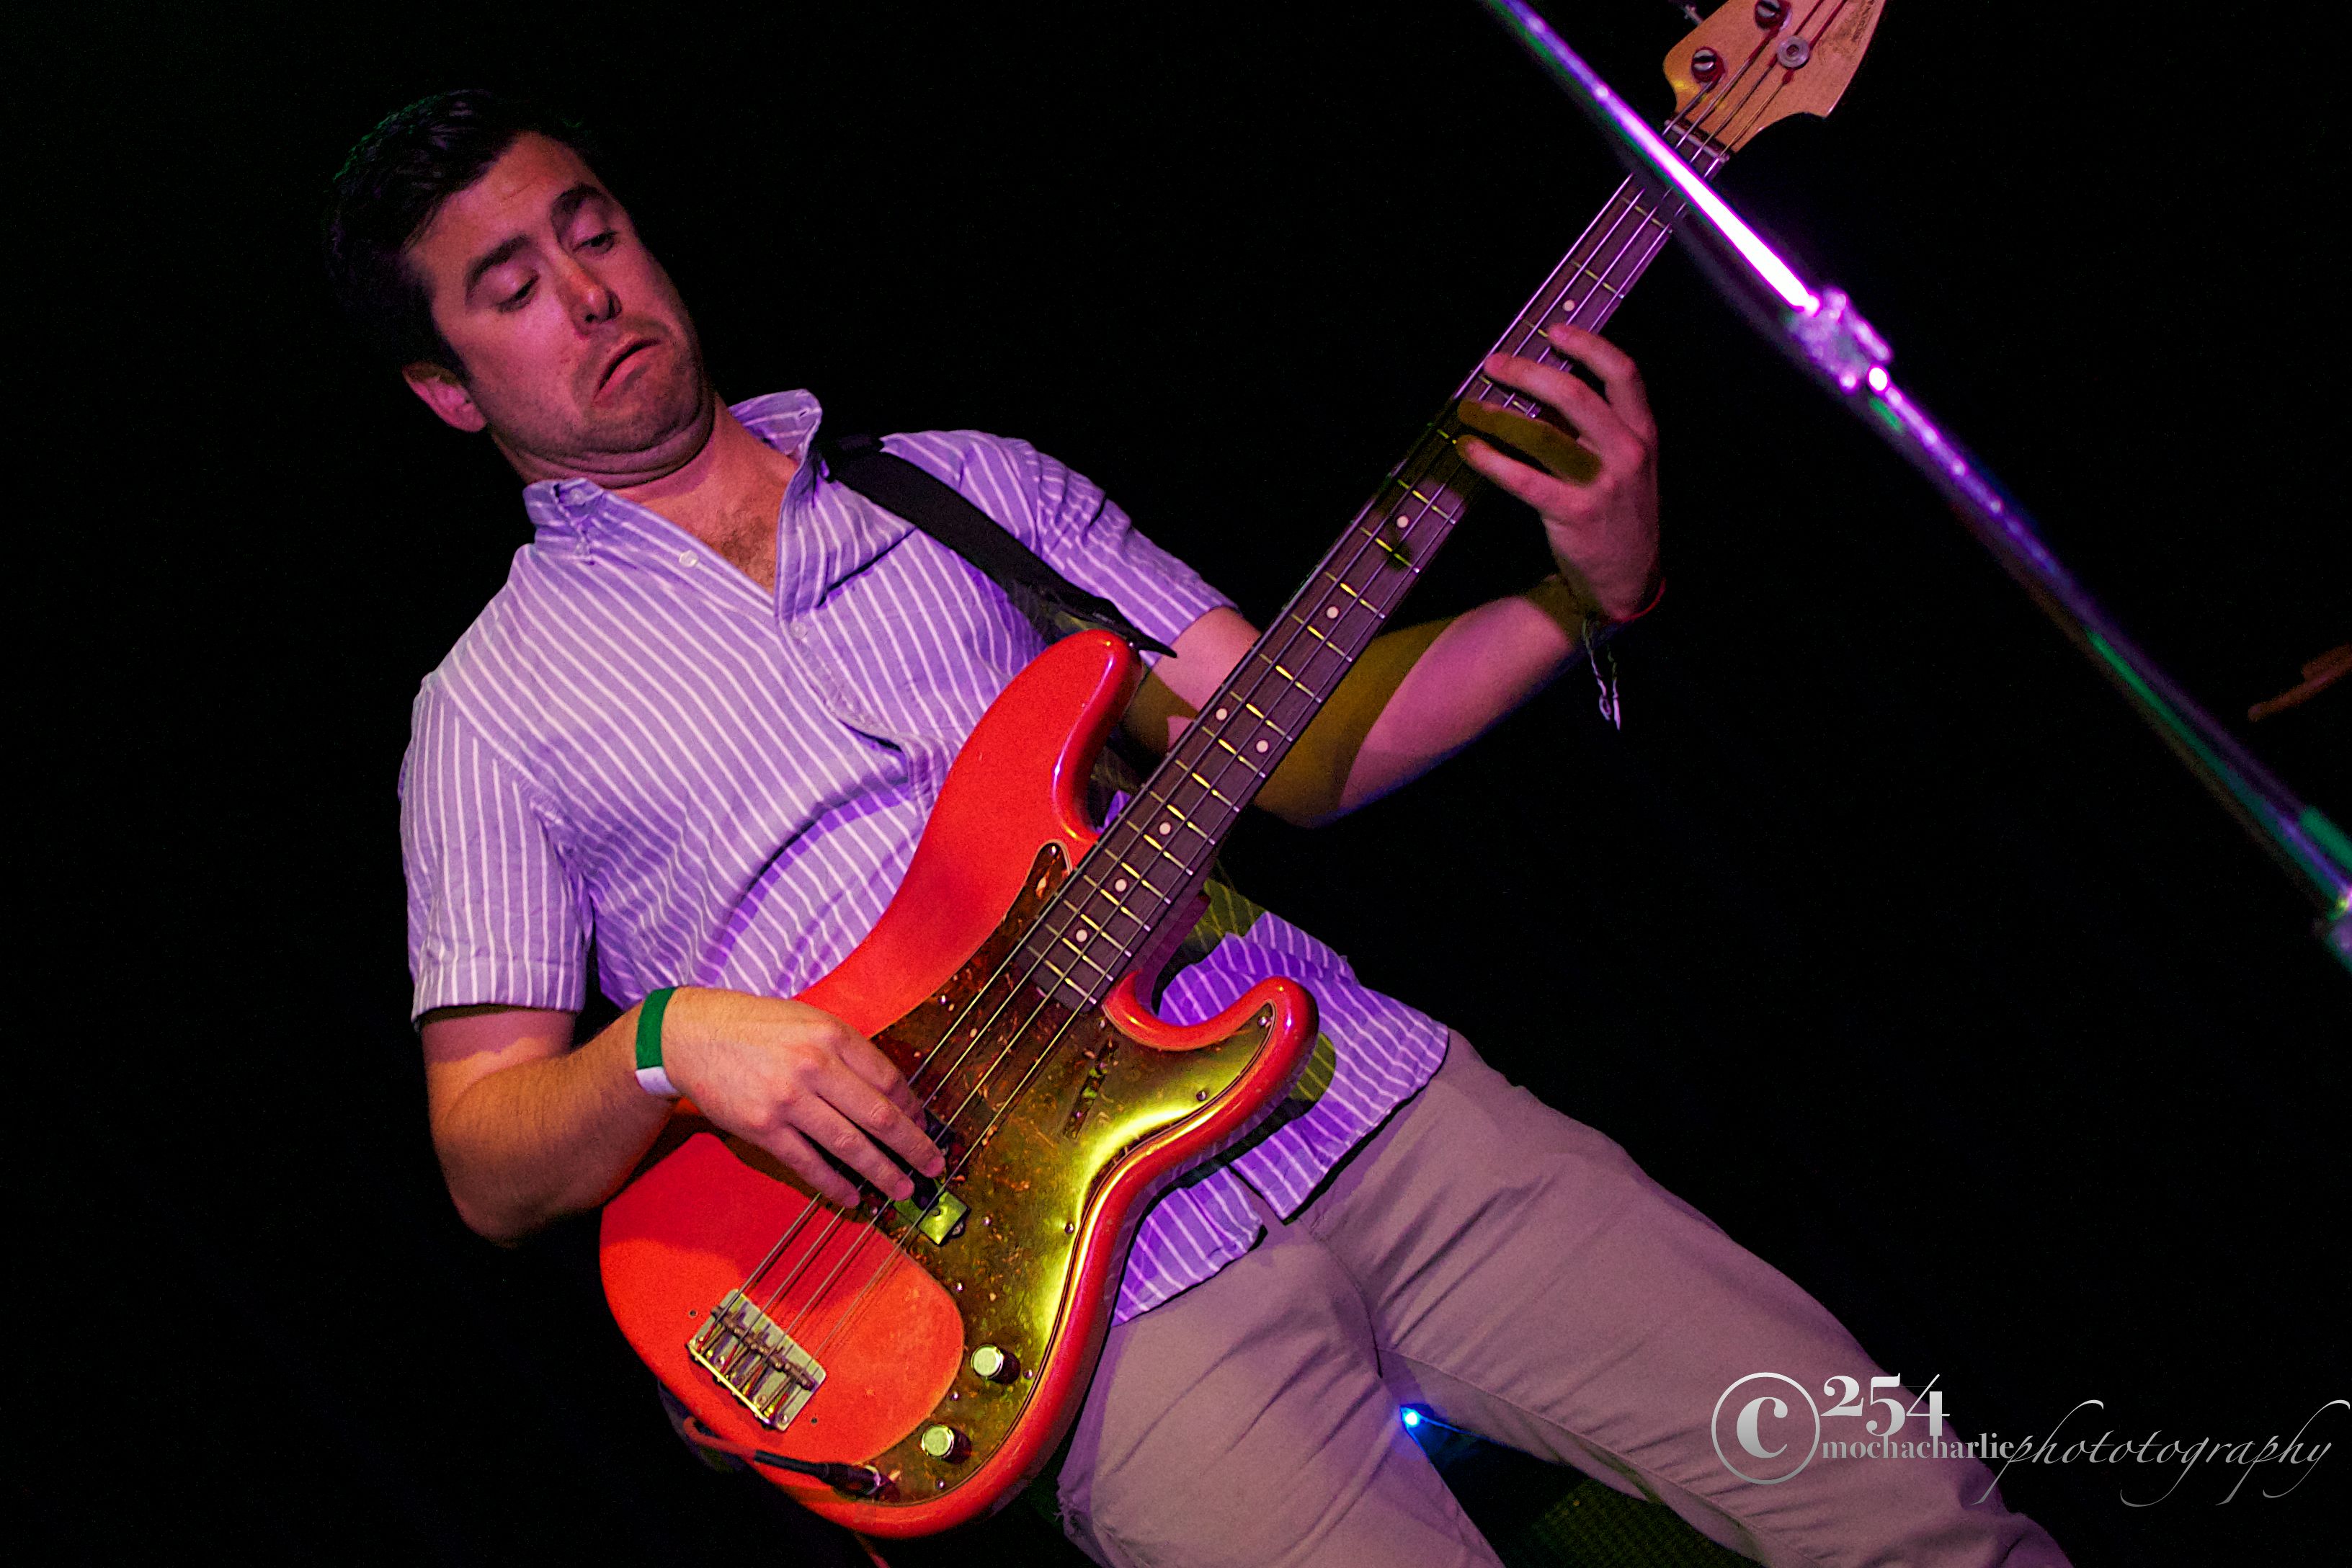 Hot Bodies In Motion Live at The Crocodile (9/7/12) – Photo By Mocha Charlie